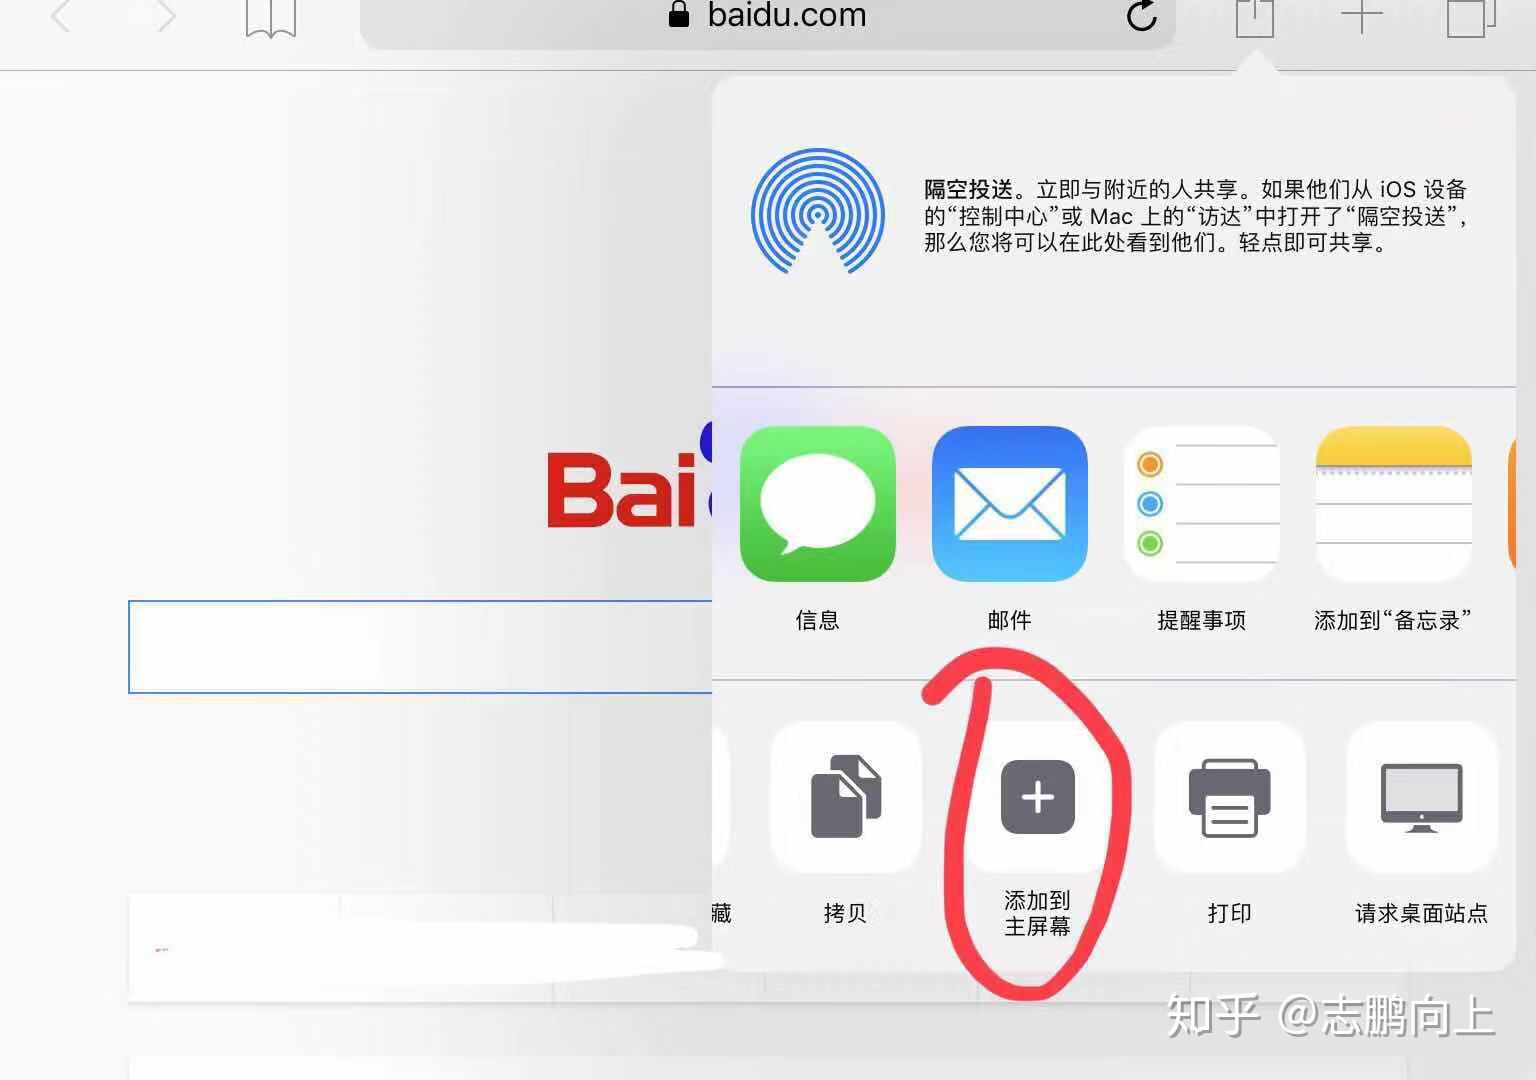 How to Customize Safari Start Page on iPhone